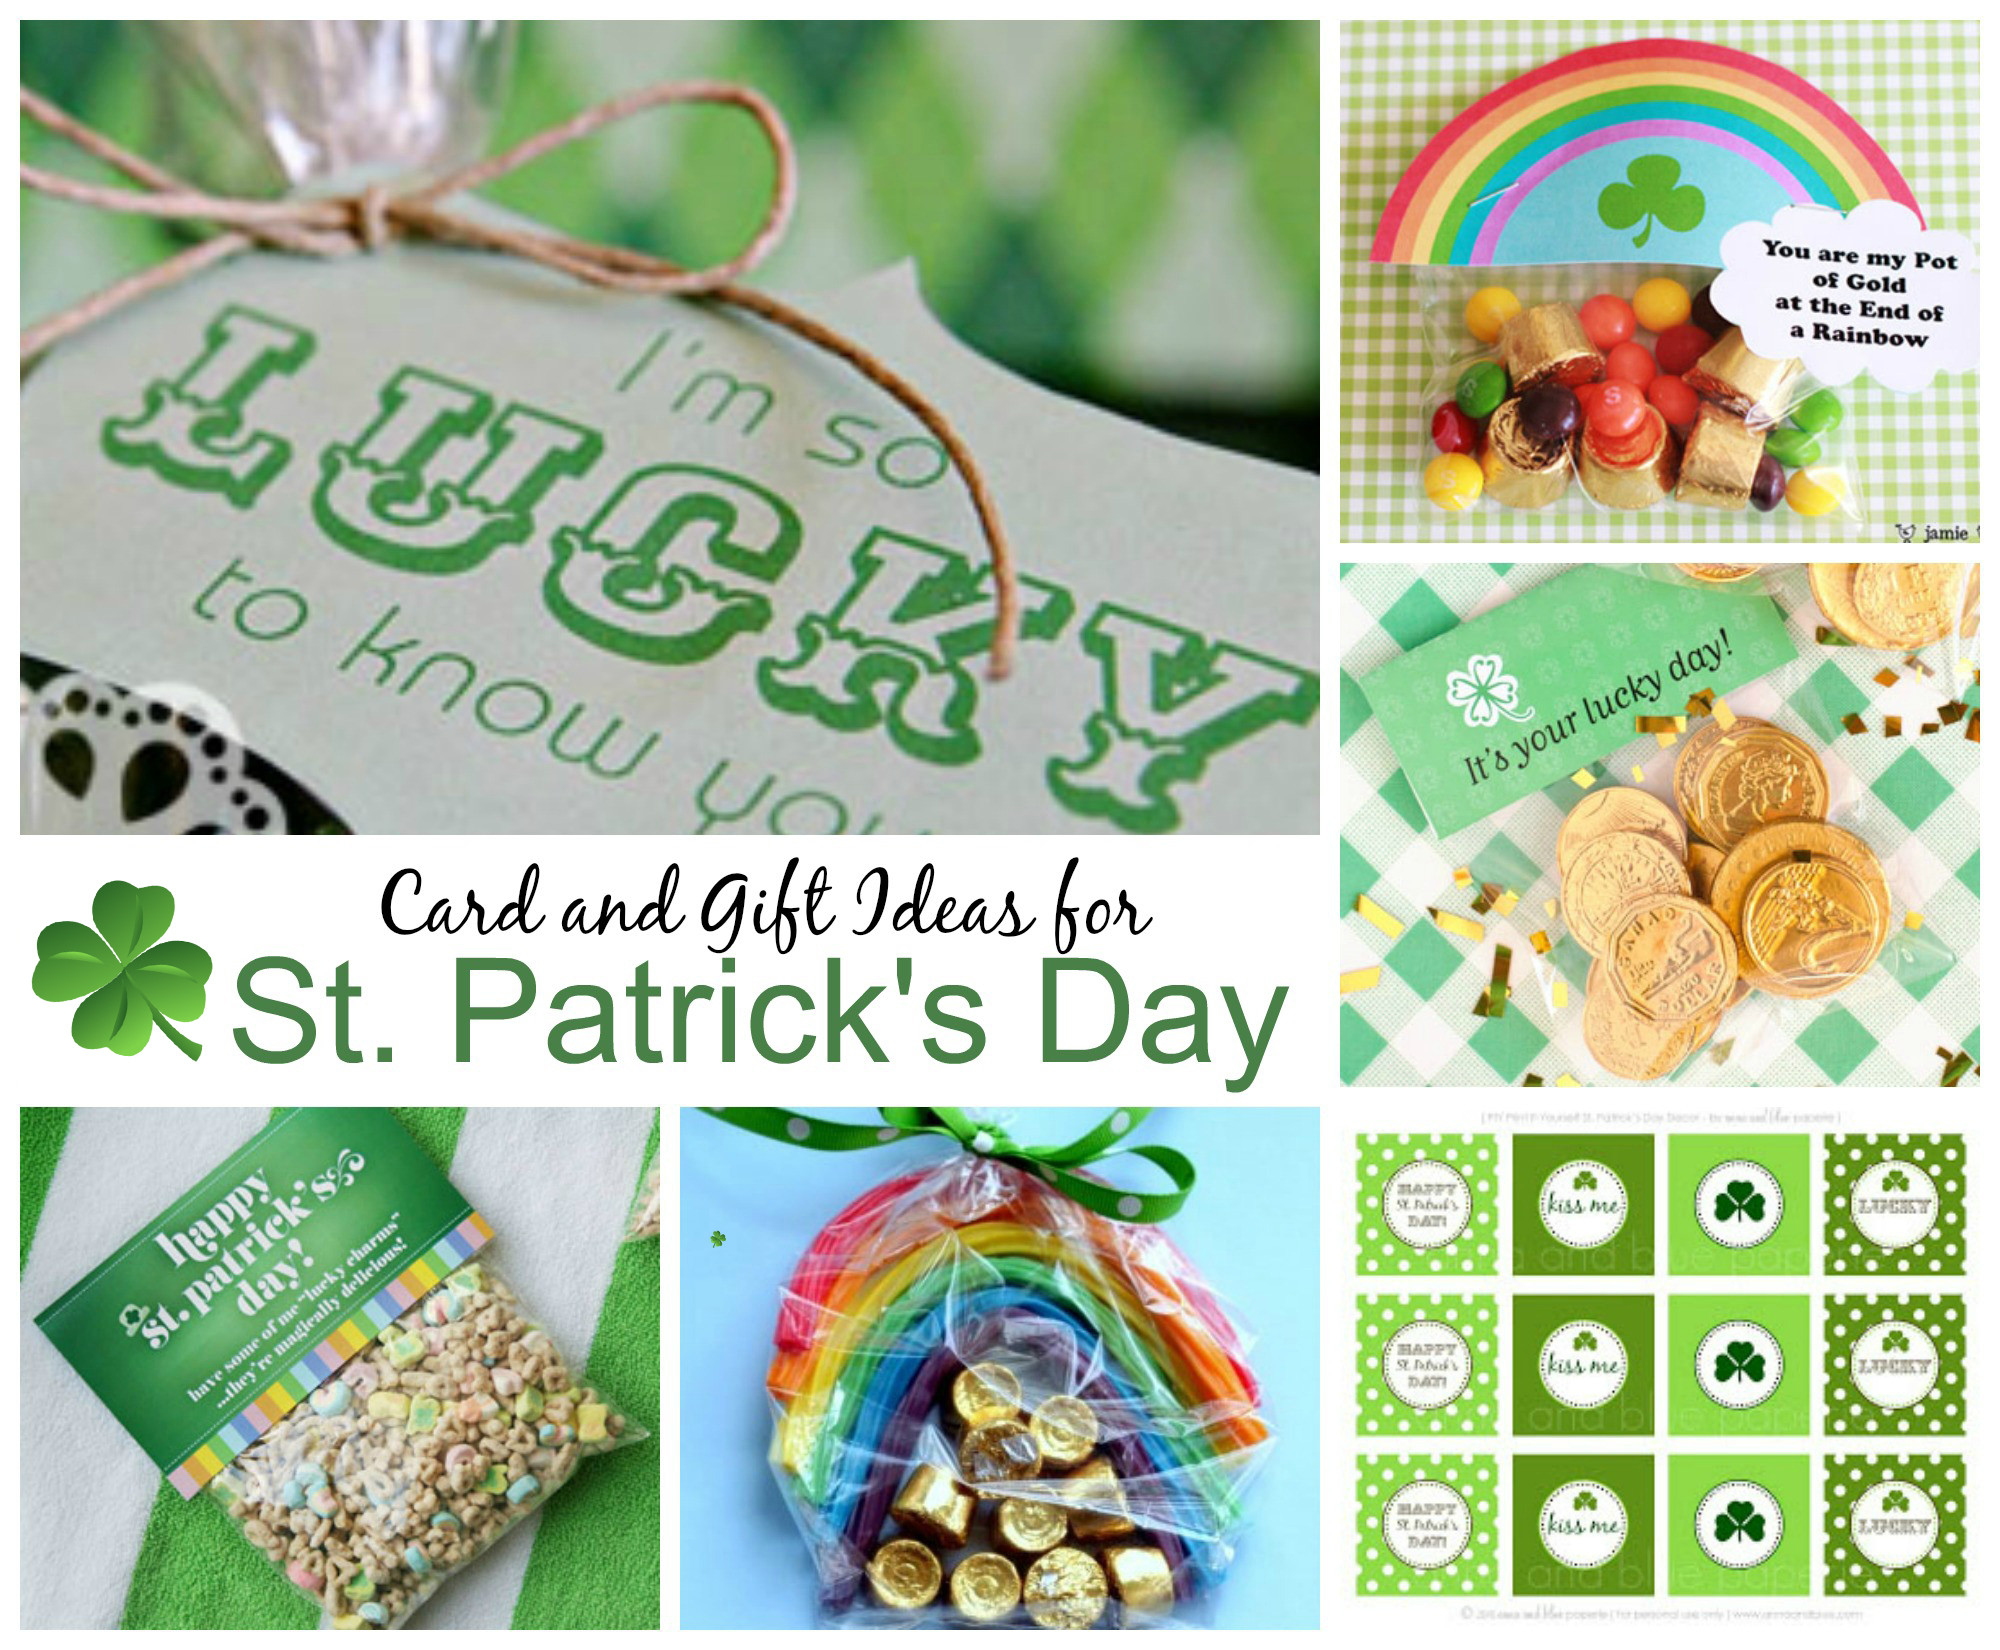 St Patrick's Day Card Ideas
 St Patrick’s Day Card and Gift Ideas